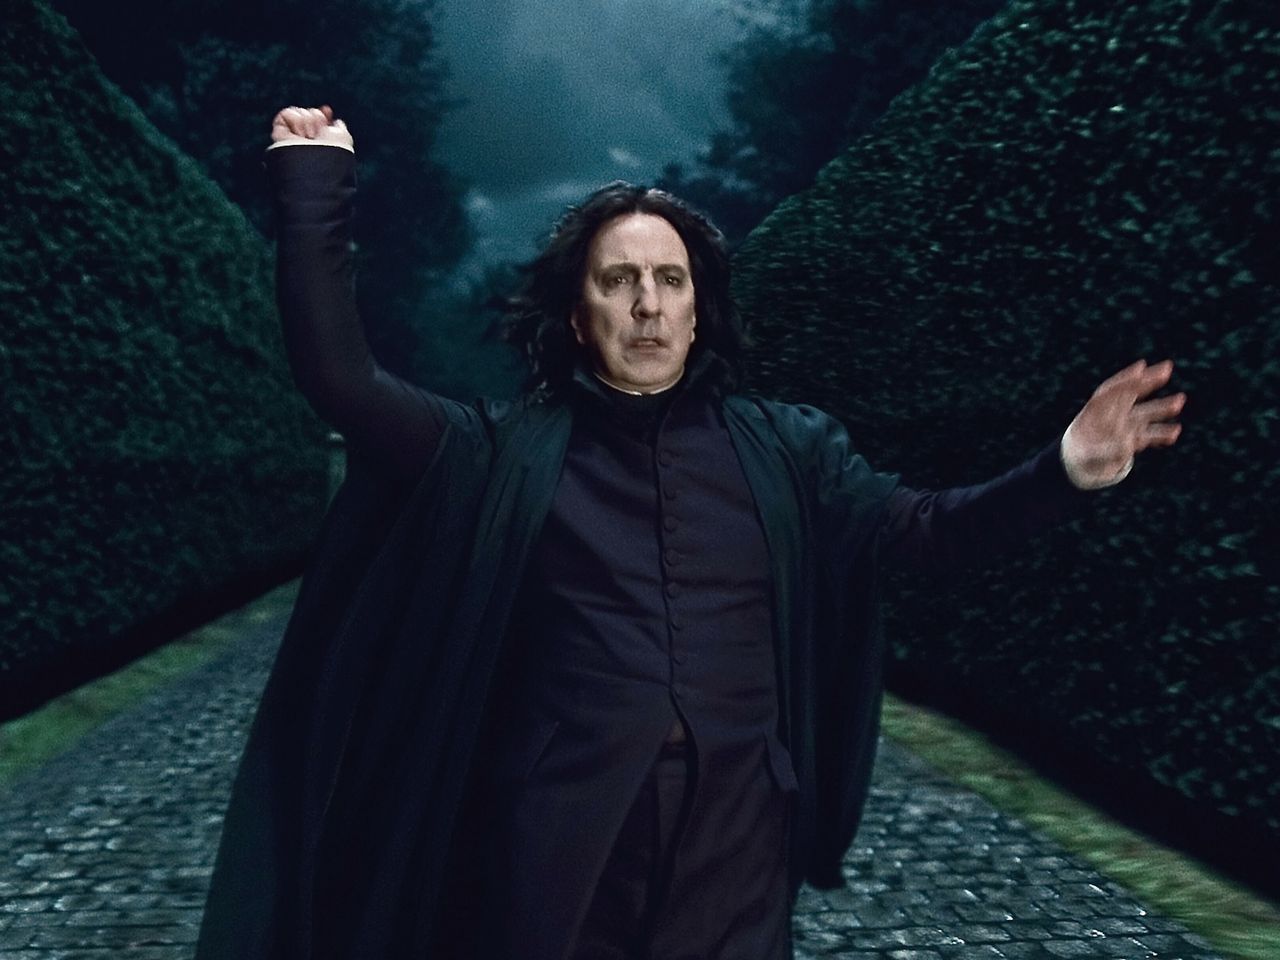 Alan Rickman's diaries reveal disdain for his iconic Harry Potter role